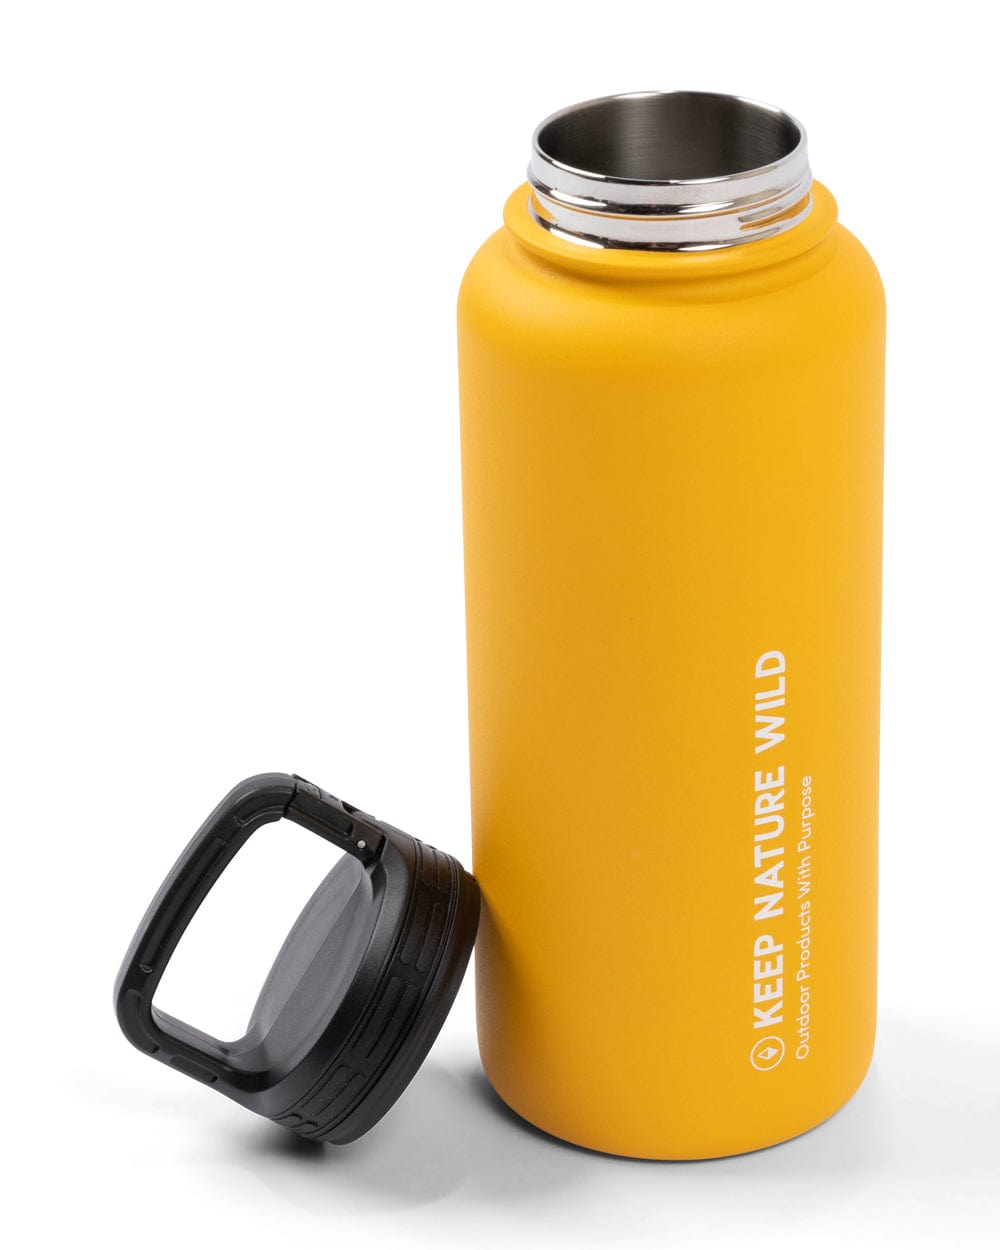 Reusable Insulated 32oz Water Bottle with Handle Clip